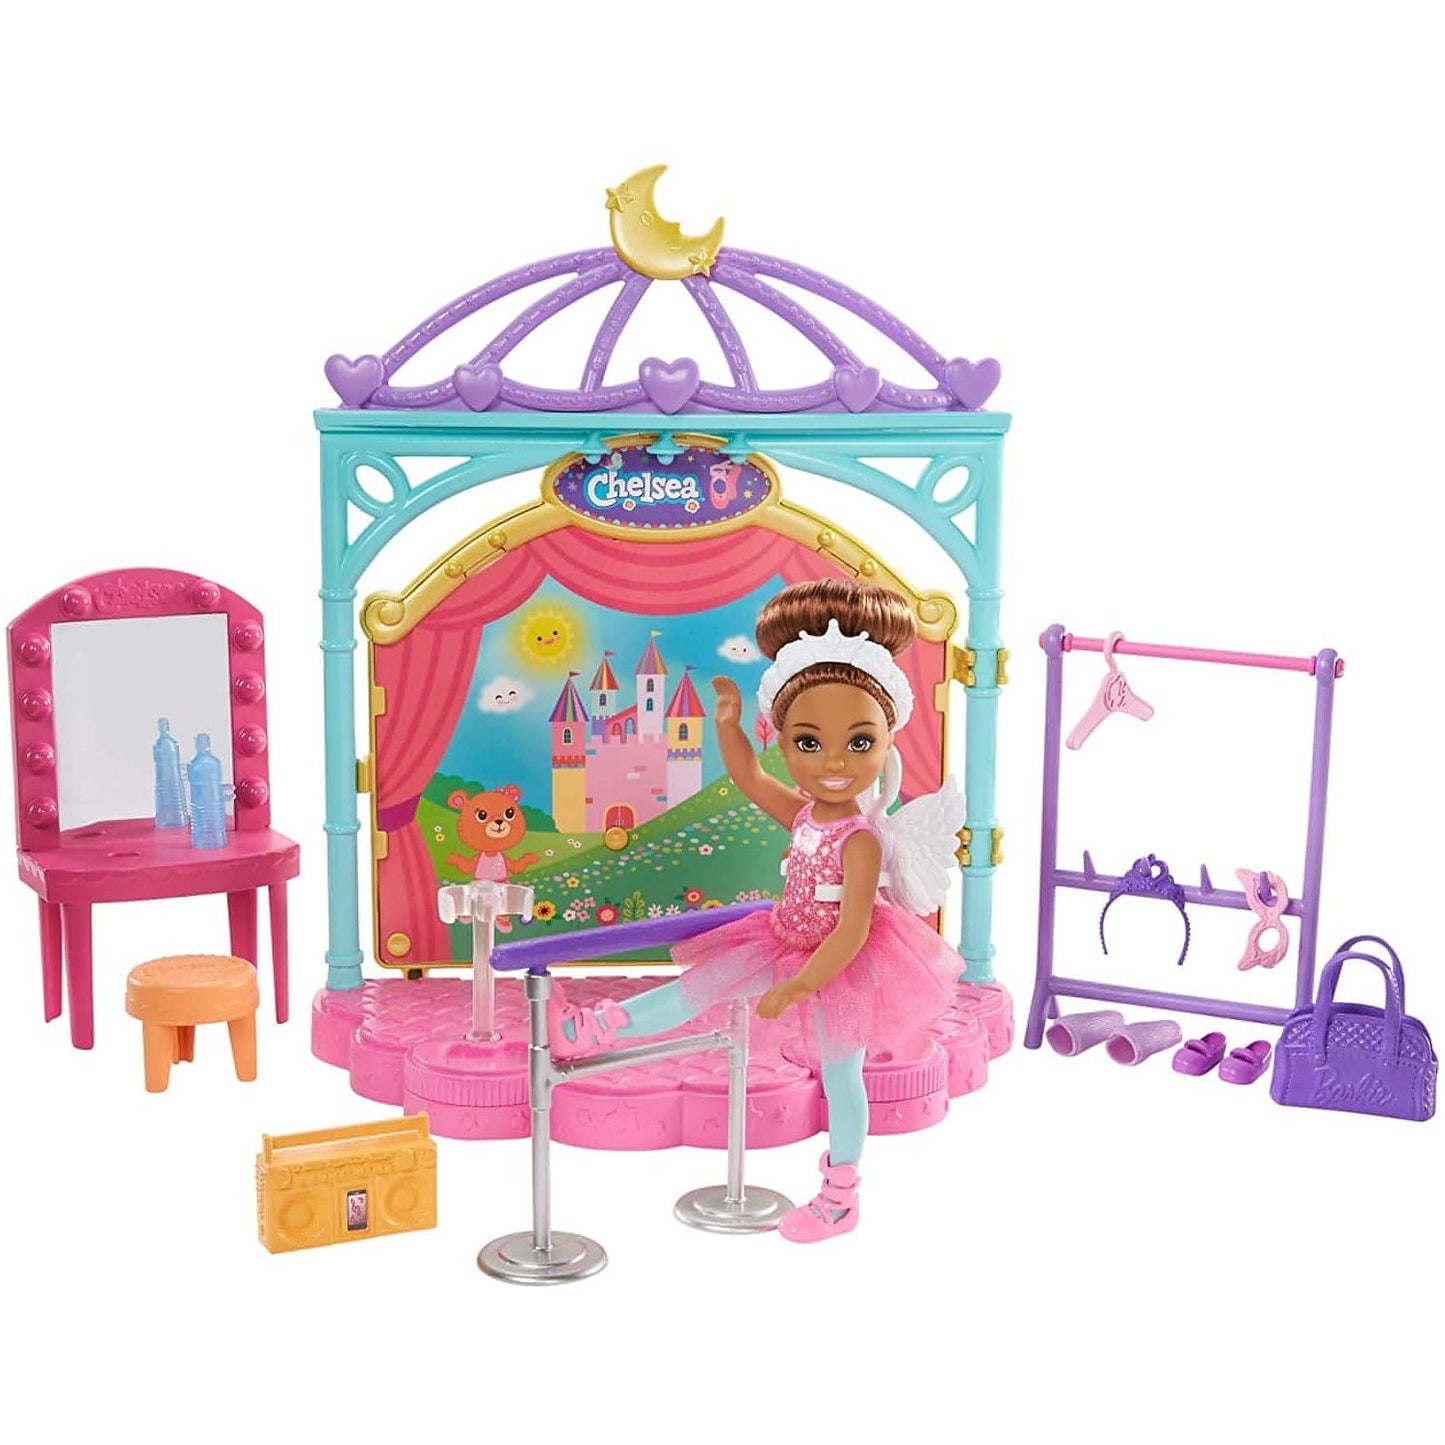 Barbie-Barbie Club Chelsea Doll and Ballet Playset 6 in Brunette with Accessories - Brandat Outlet